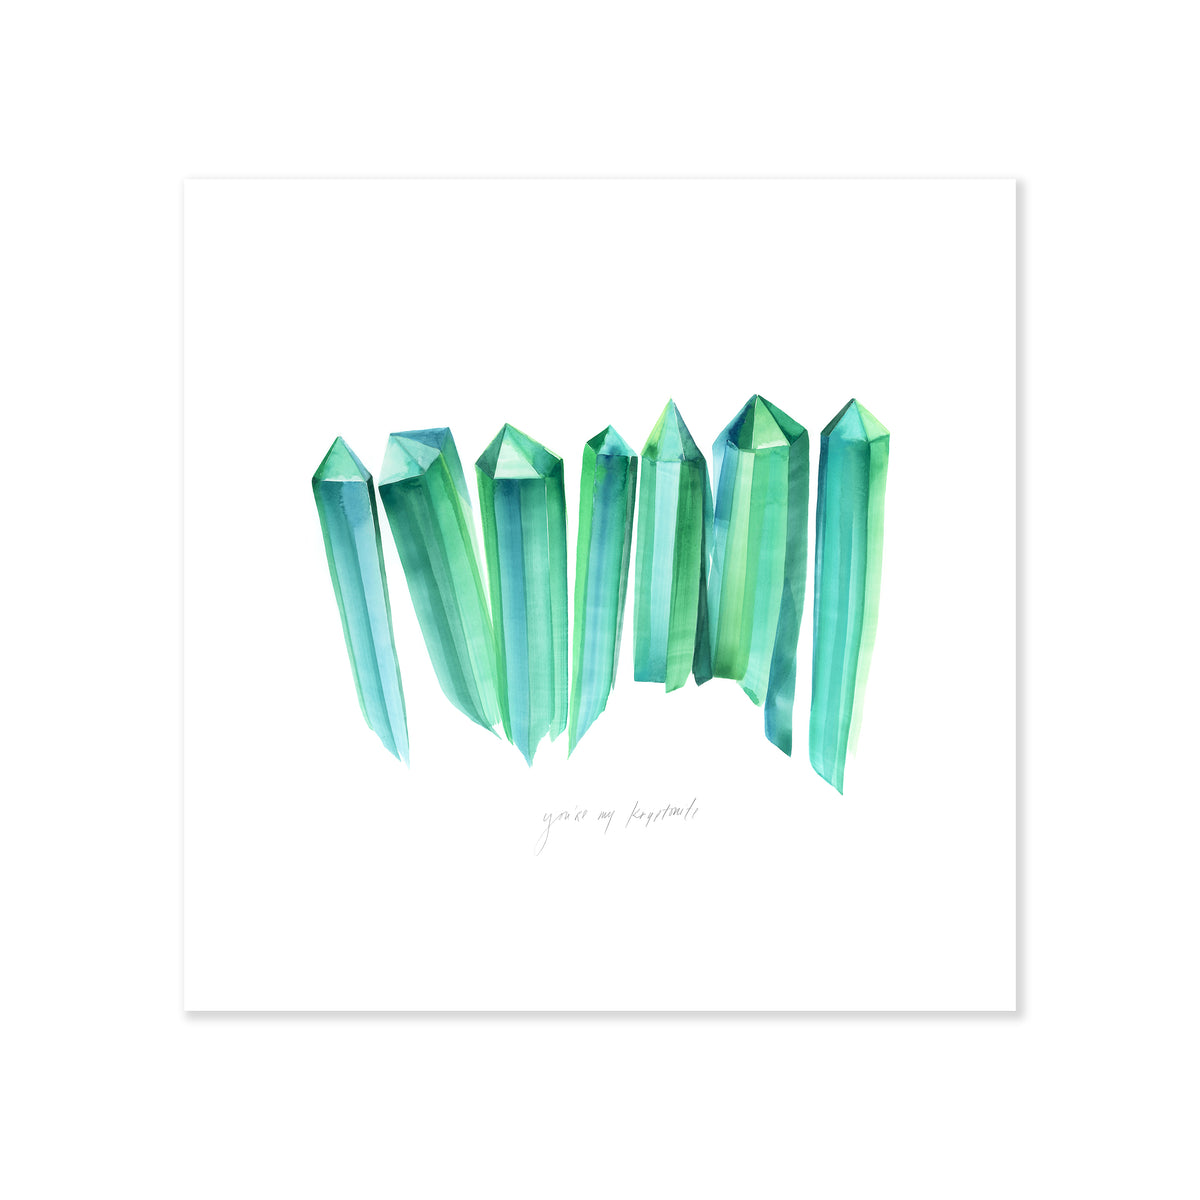 A fine art print illustrating seven emerald gemstones with a script below them that reads you're my kryptonite painted with watercolors on a soft white background